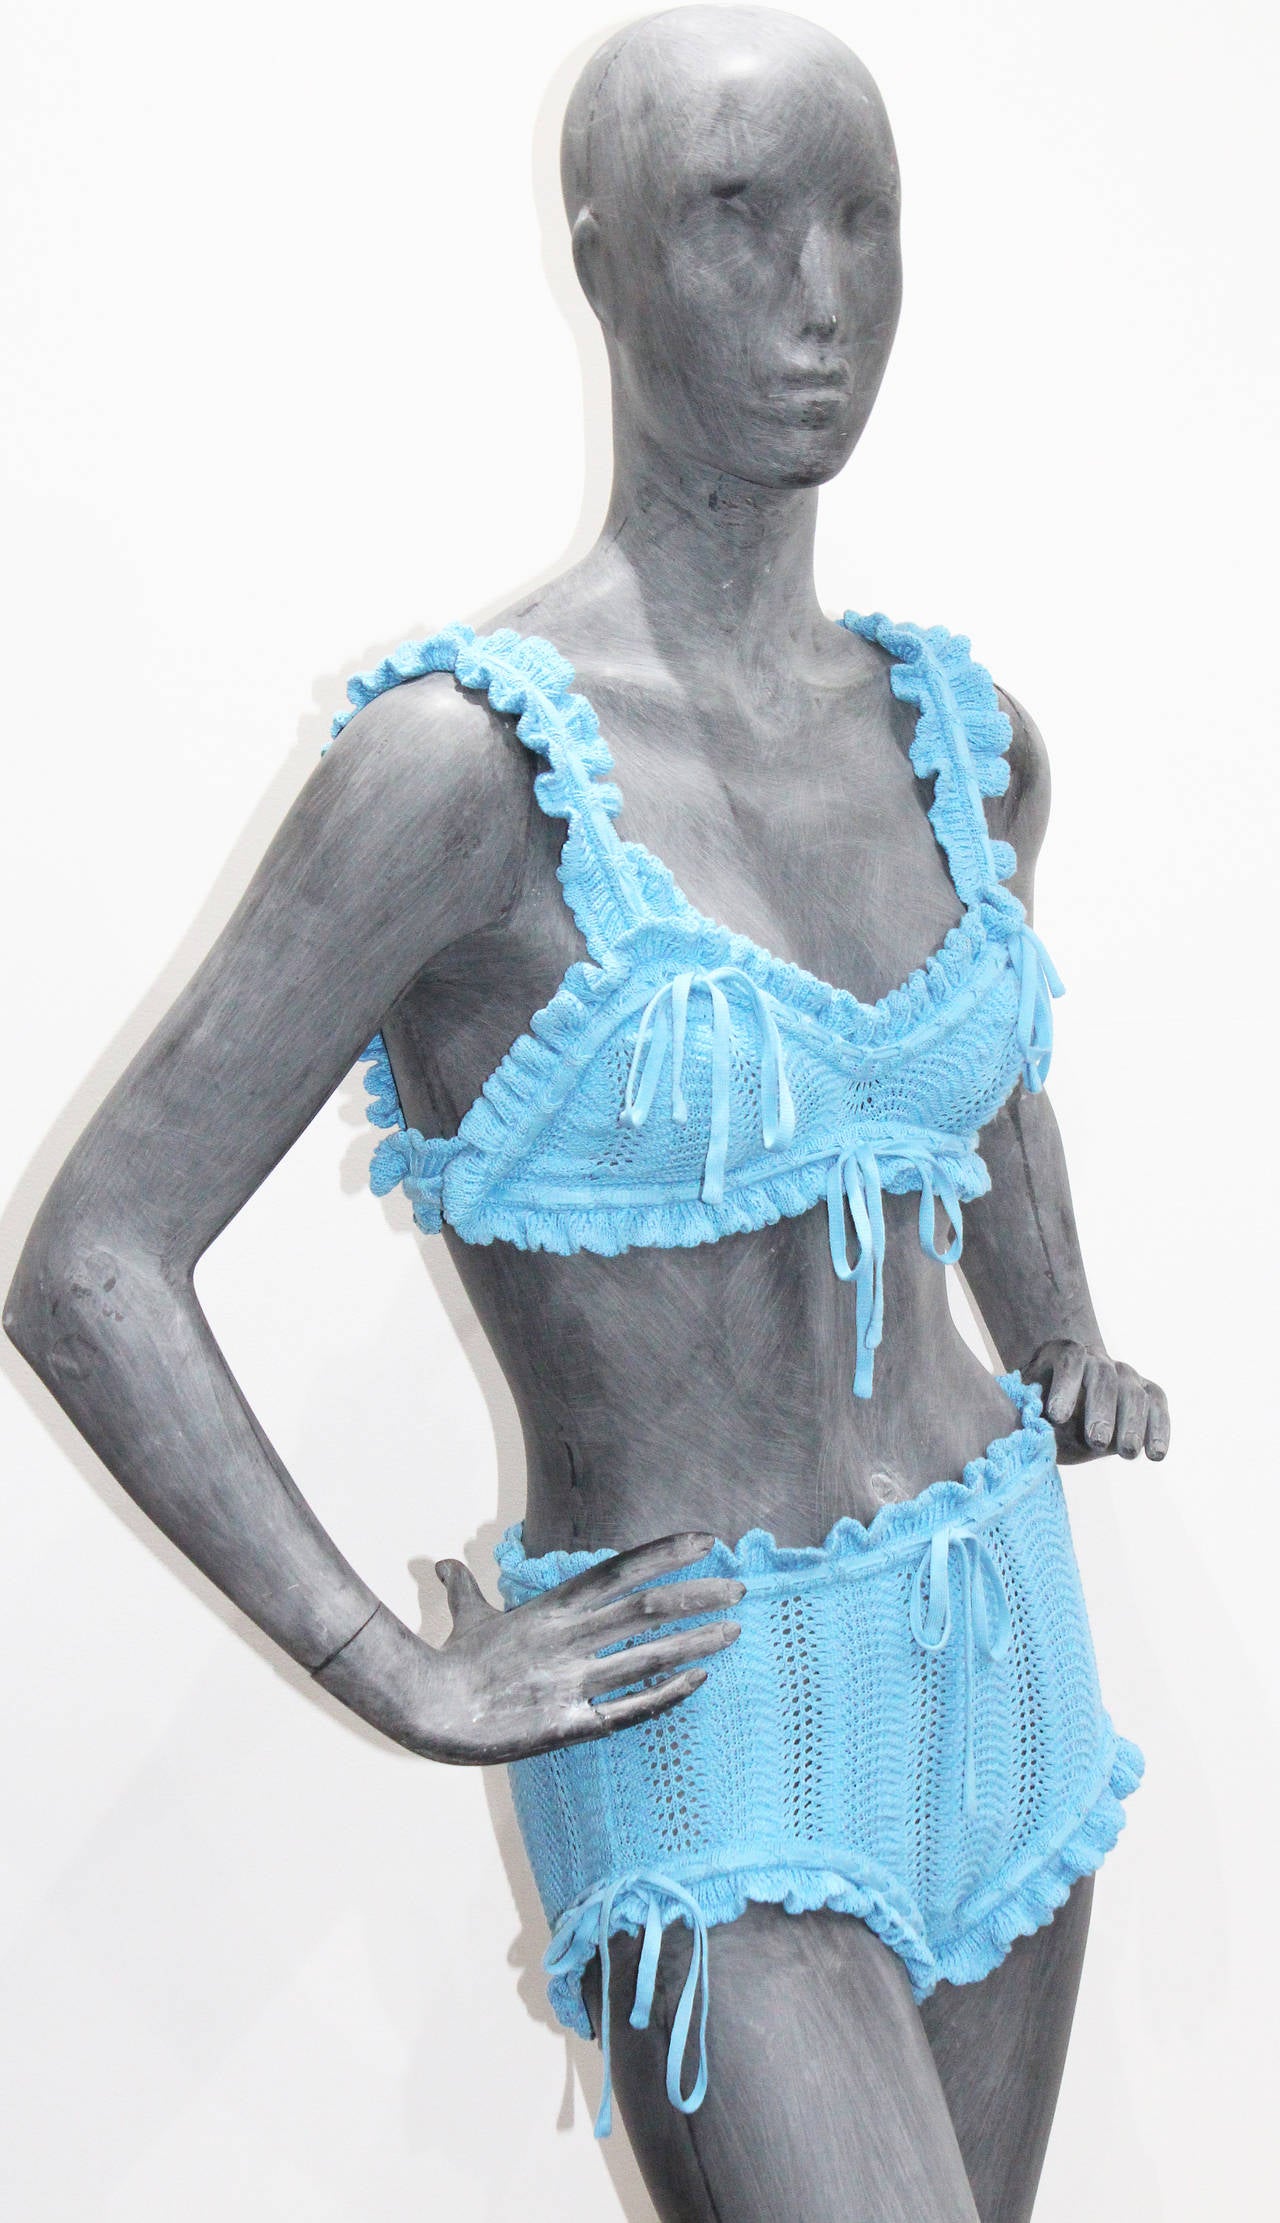 A rare Vivienne Westwood crochet knitted 2 piece bikini from the 'On Liberty' A/W 1994 collection. 

The suit has frilled trim, lace up bows and made of 100% cotton in baby blue.

Size Small - UK 6-8 / FR 34-36